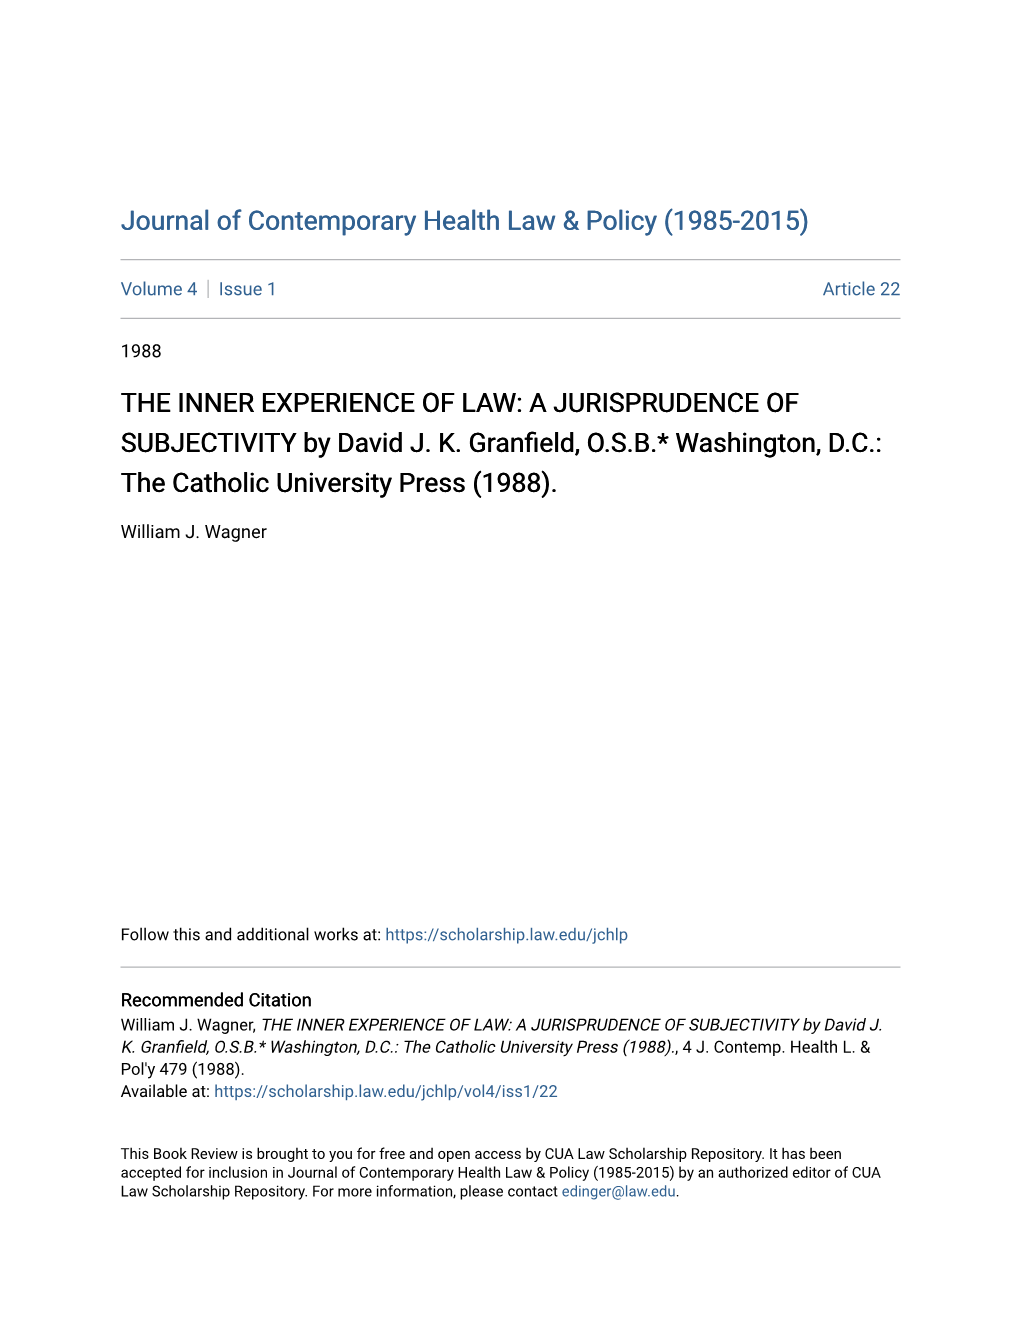 THE INNER EXPERIENCE of LAW: a JURISPRUDENCE of SUBJECTIVITY by David J